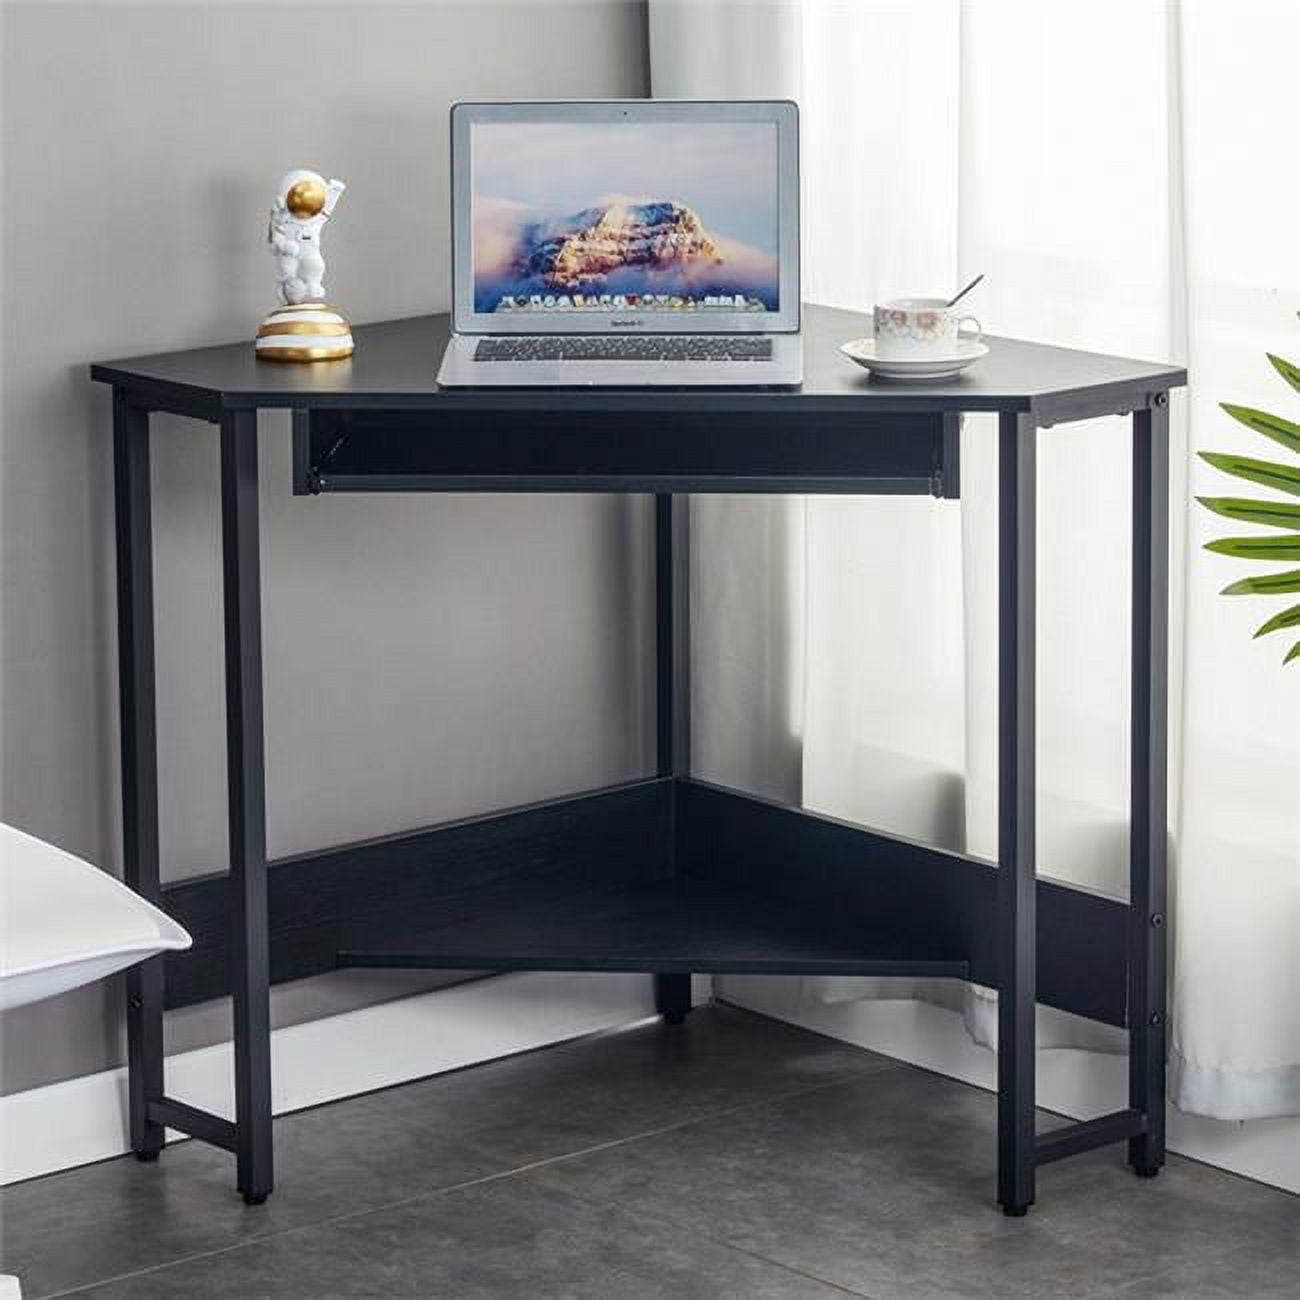 Picture of Direct Wicker UBS-W37031250 Triangle Computer Desk, Corner Desk With Smooth Keyboard Tray and Storage Shelves, Compact Home Office (Black)